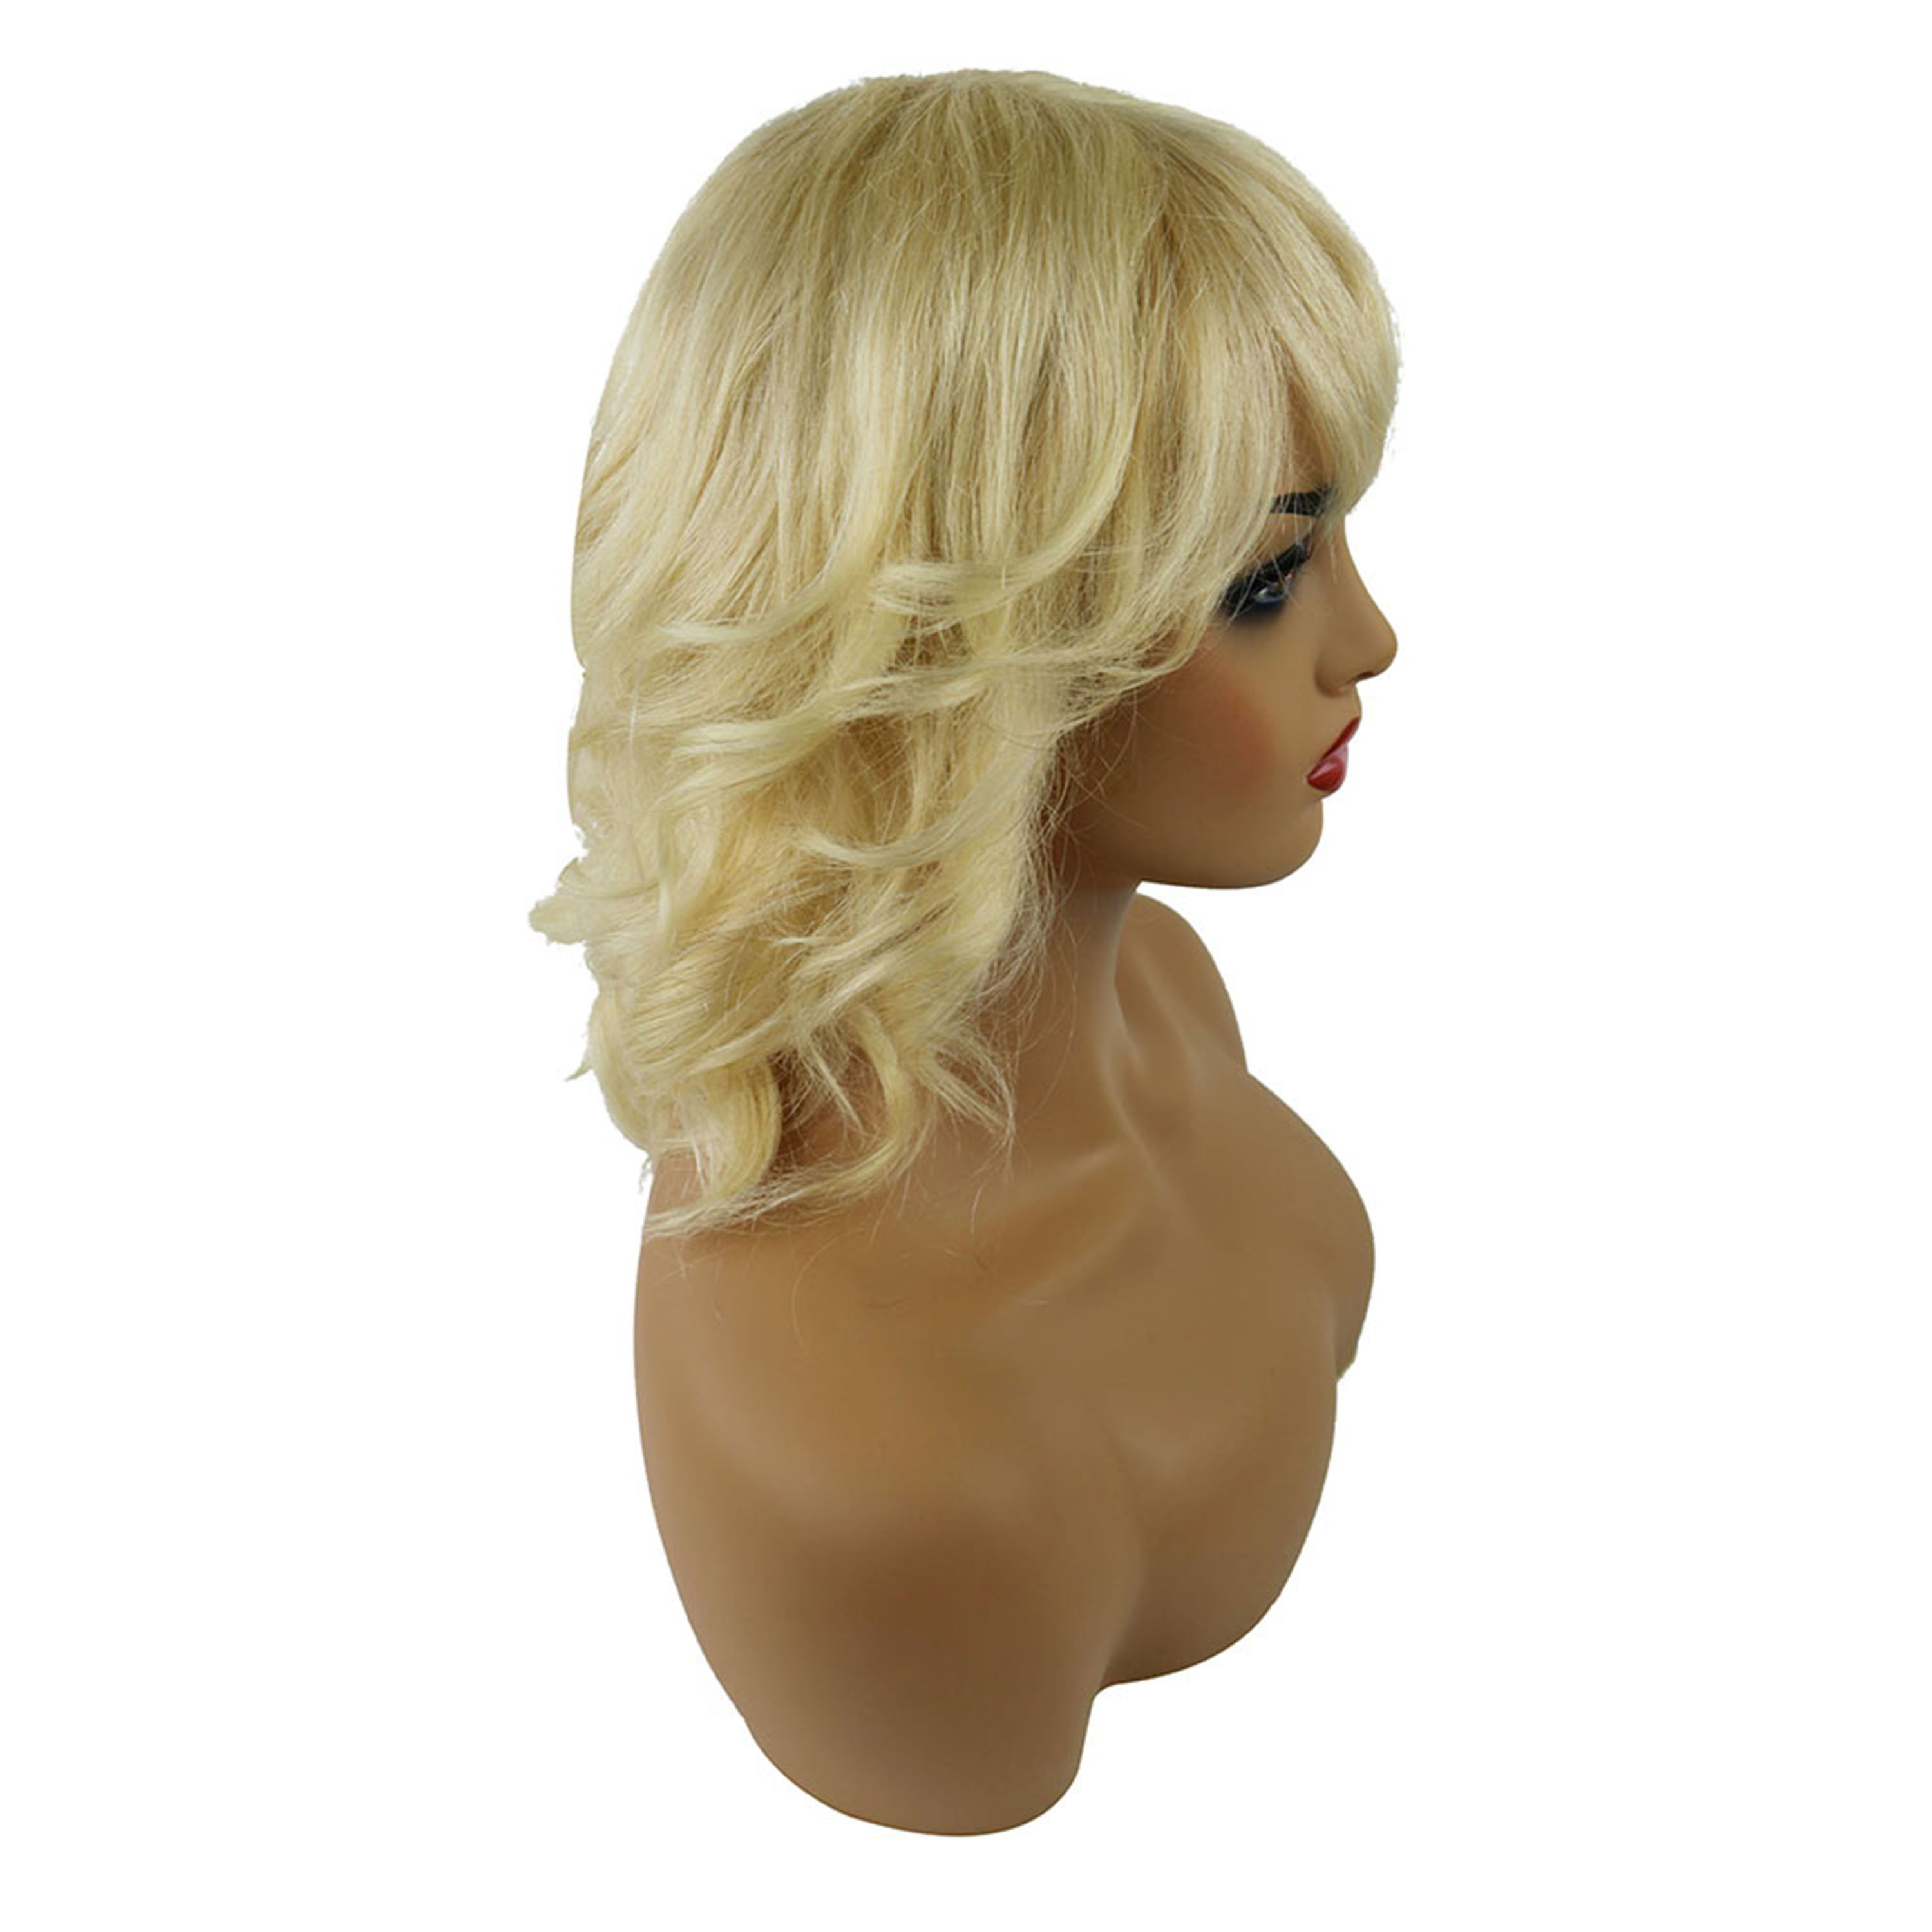 Hot Loyered Loose Wave Human Hairstyle Capless Women Wig 12 Inches